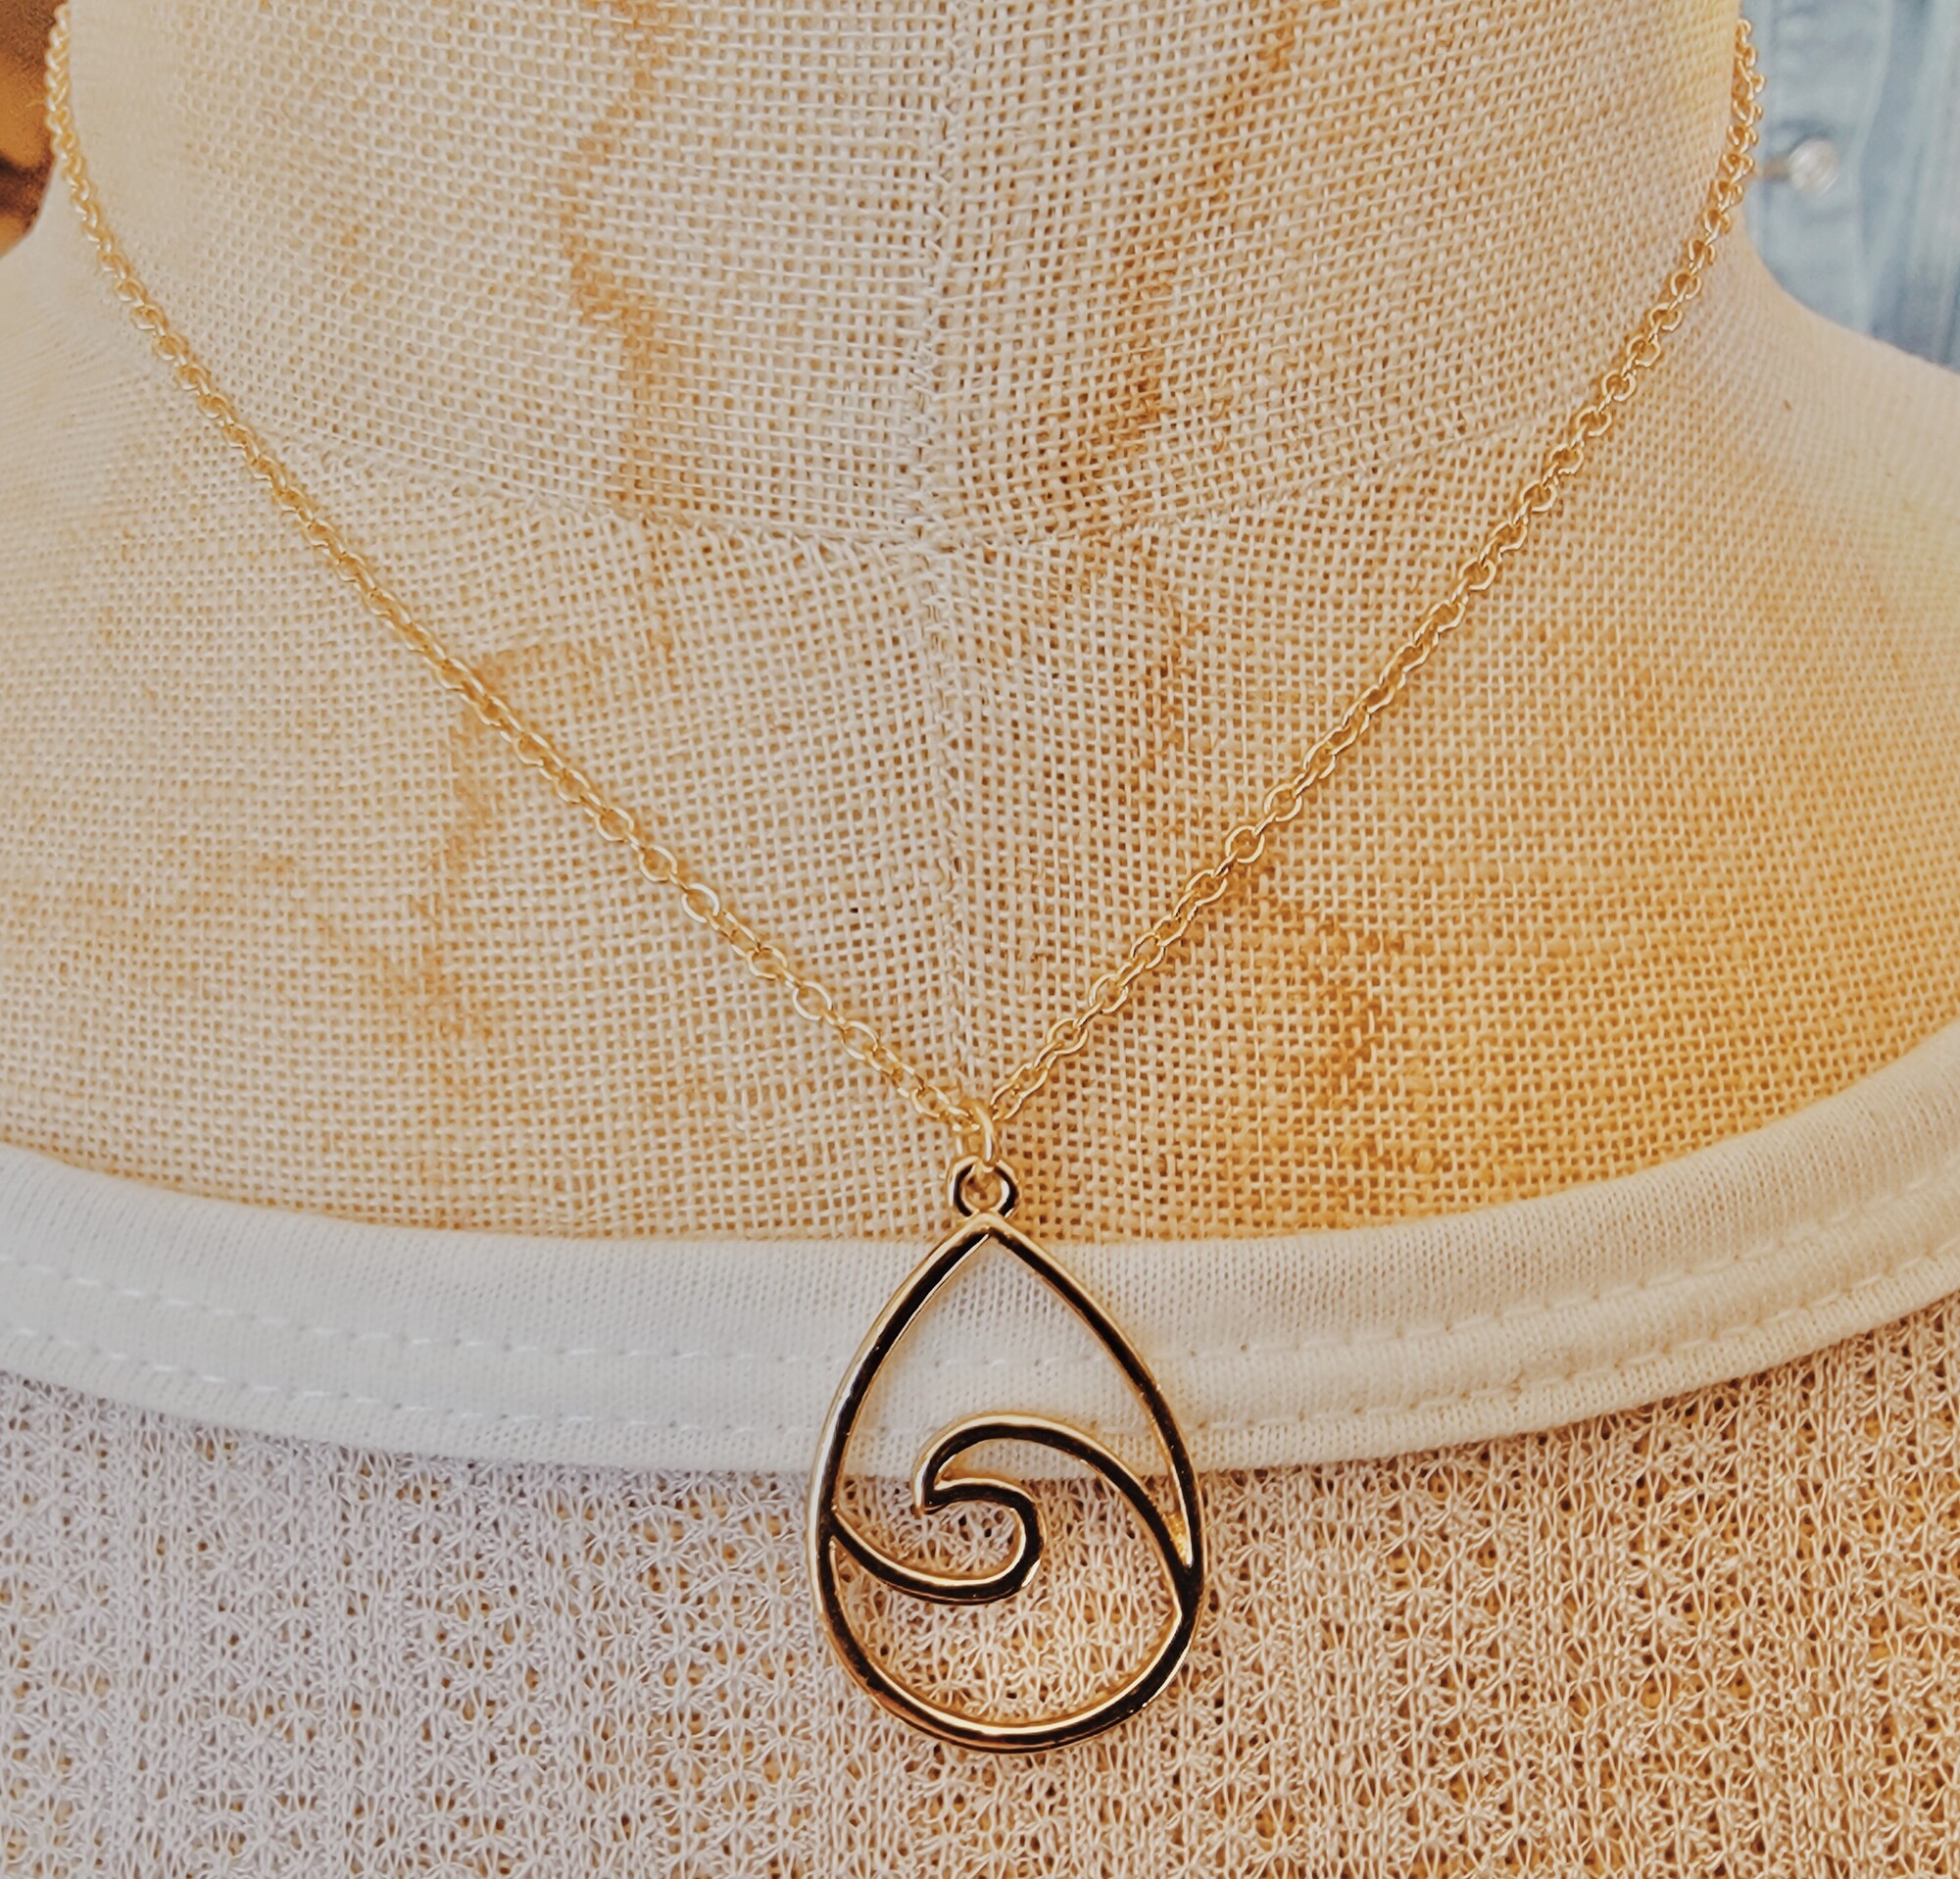 This dainty gold wave necklace is on a 15 inch chain with a 3 inch extender!